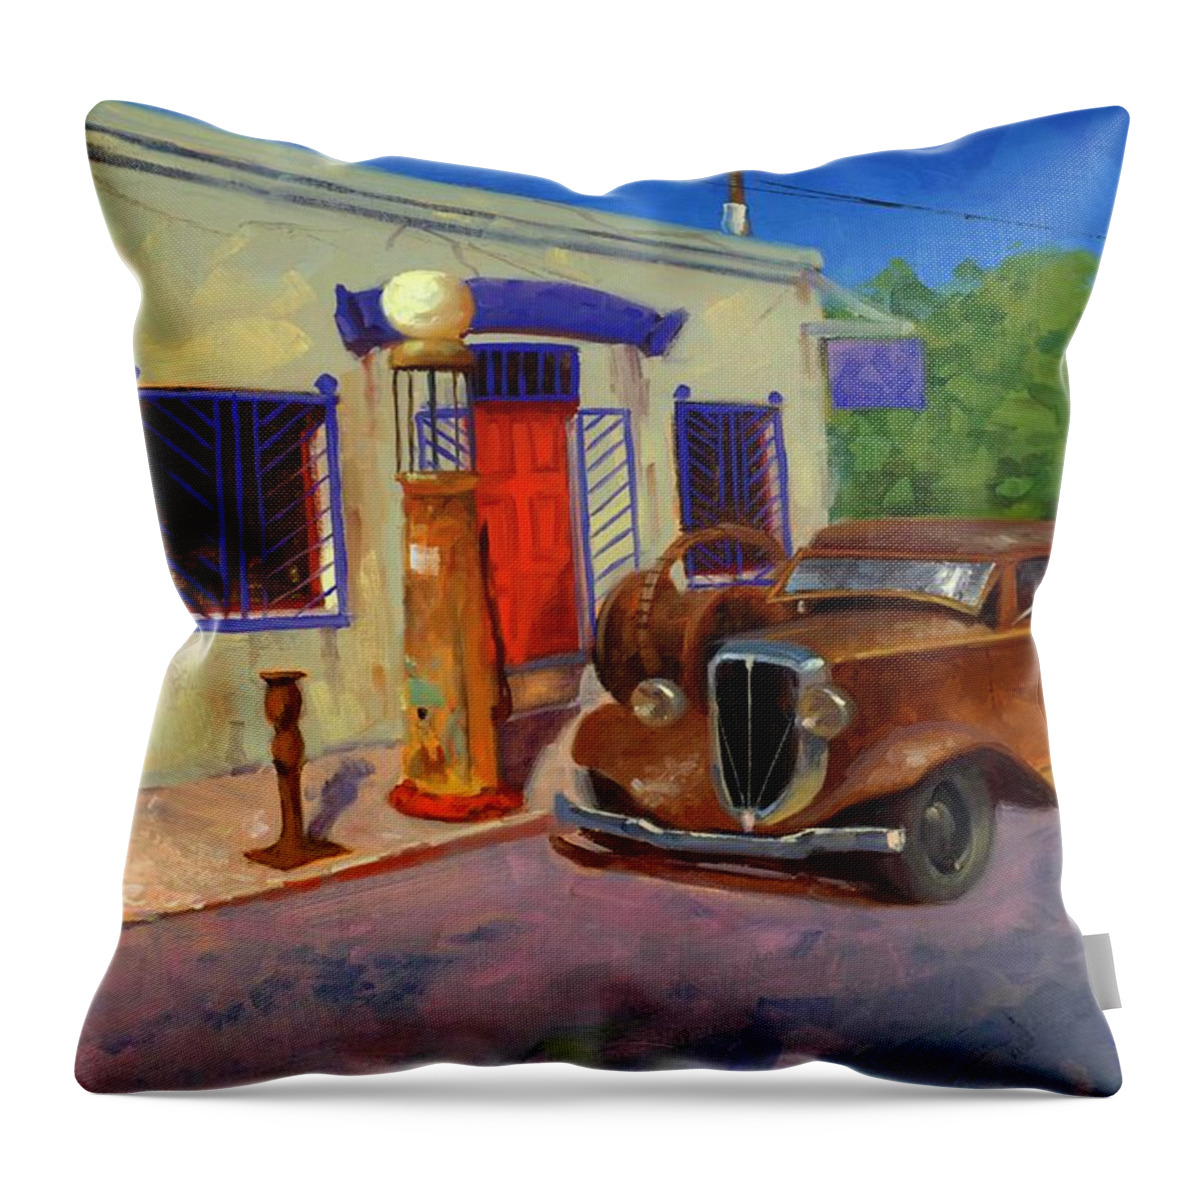 Studebaker Throw Pillow featuring the painting 33 Studebaker by Cody DeLong